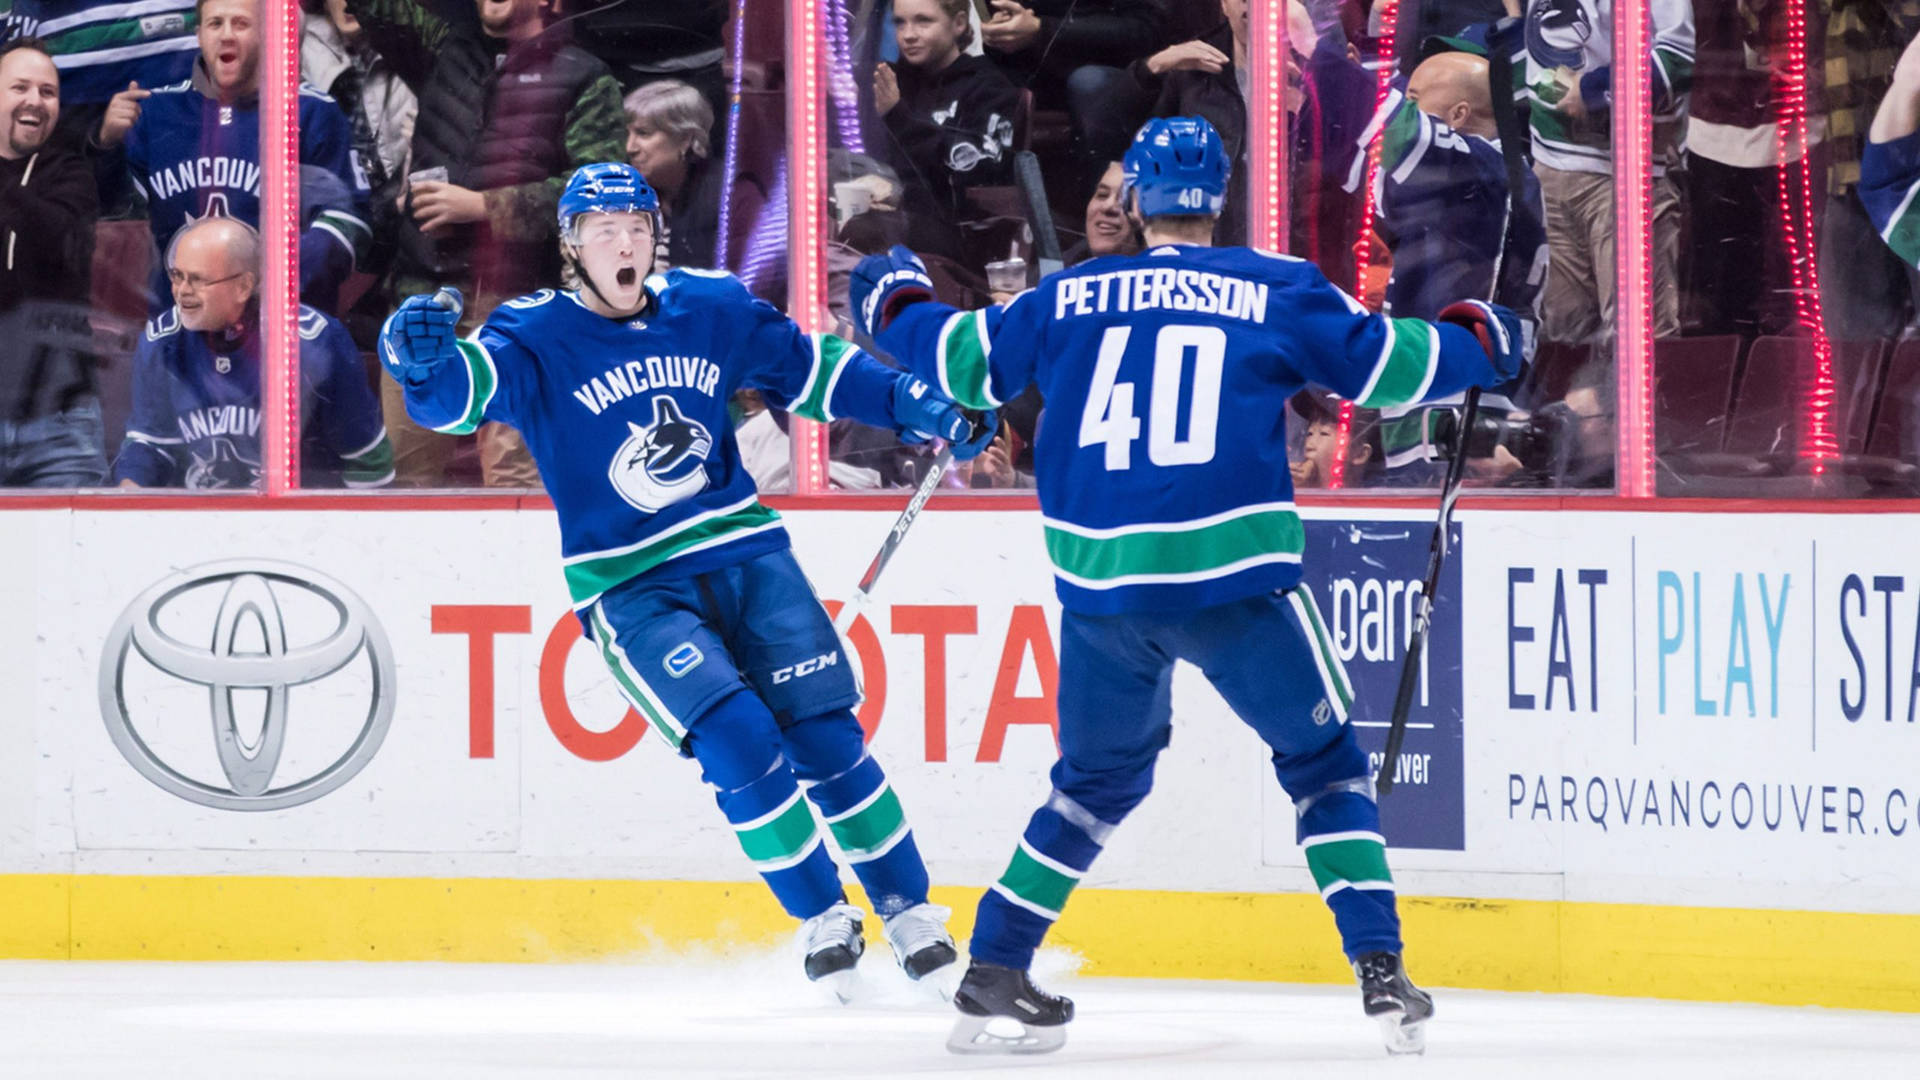 Vancouver Canucks Players Elias Pettersson And Brock Boeser Background